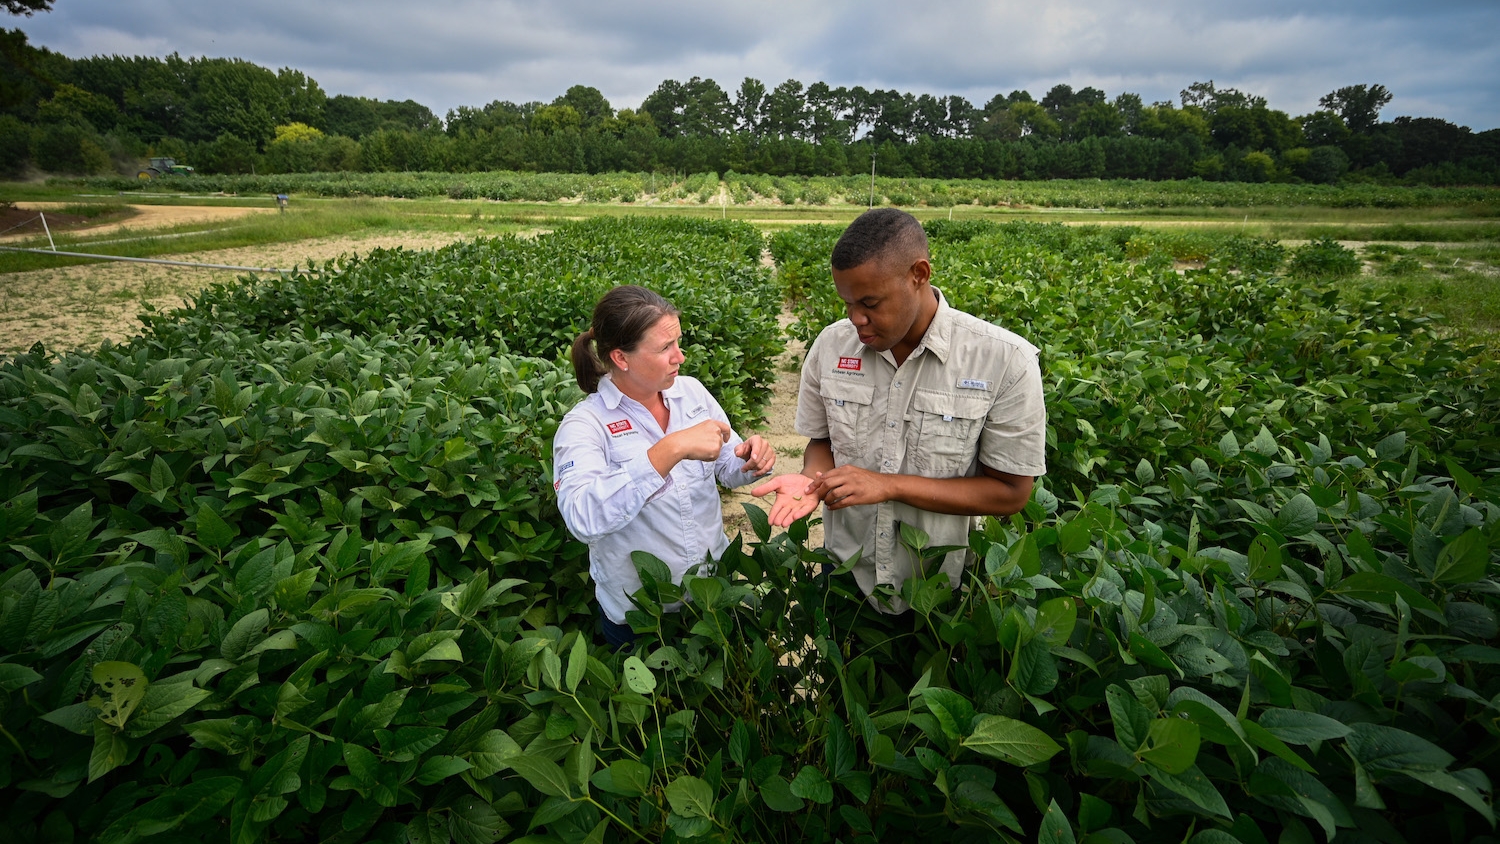 NC State Extension's Rachel Vann and DJ Stokes examine soybeans in the field.